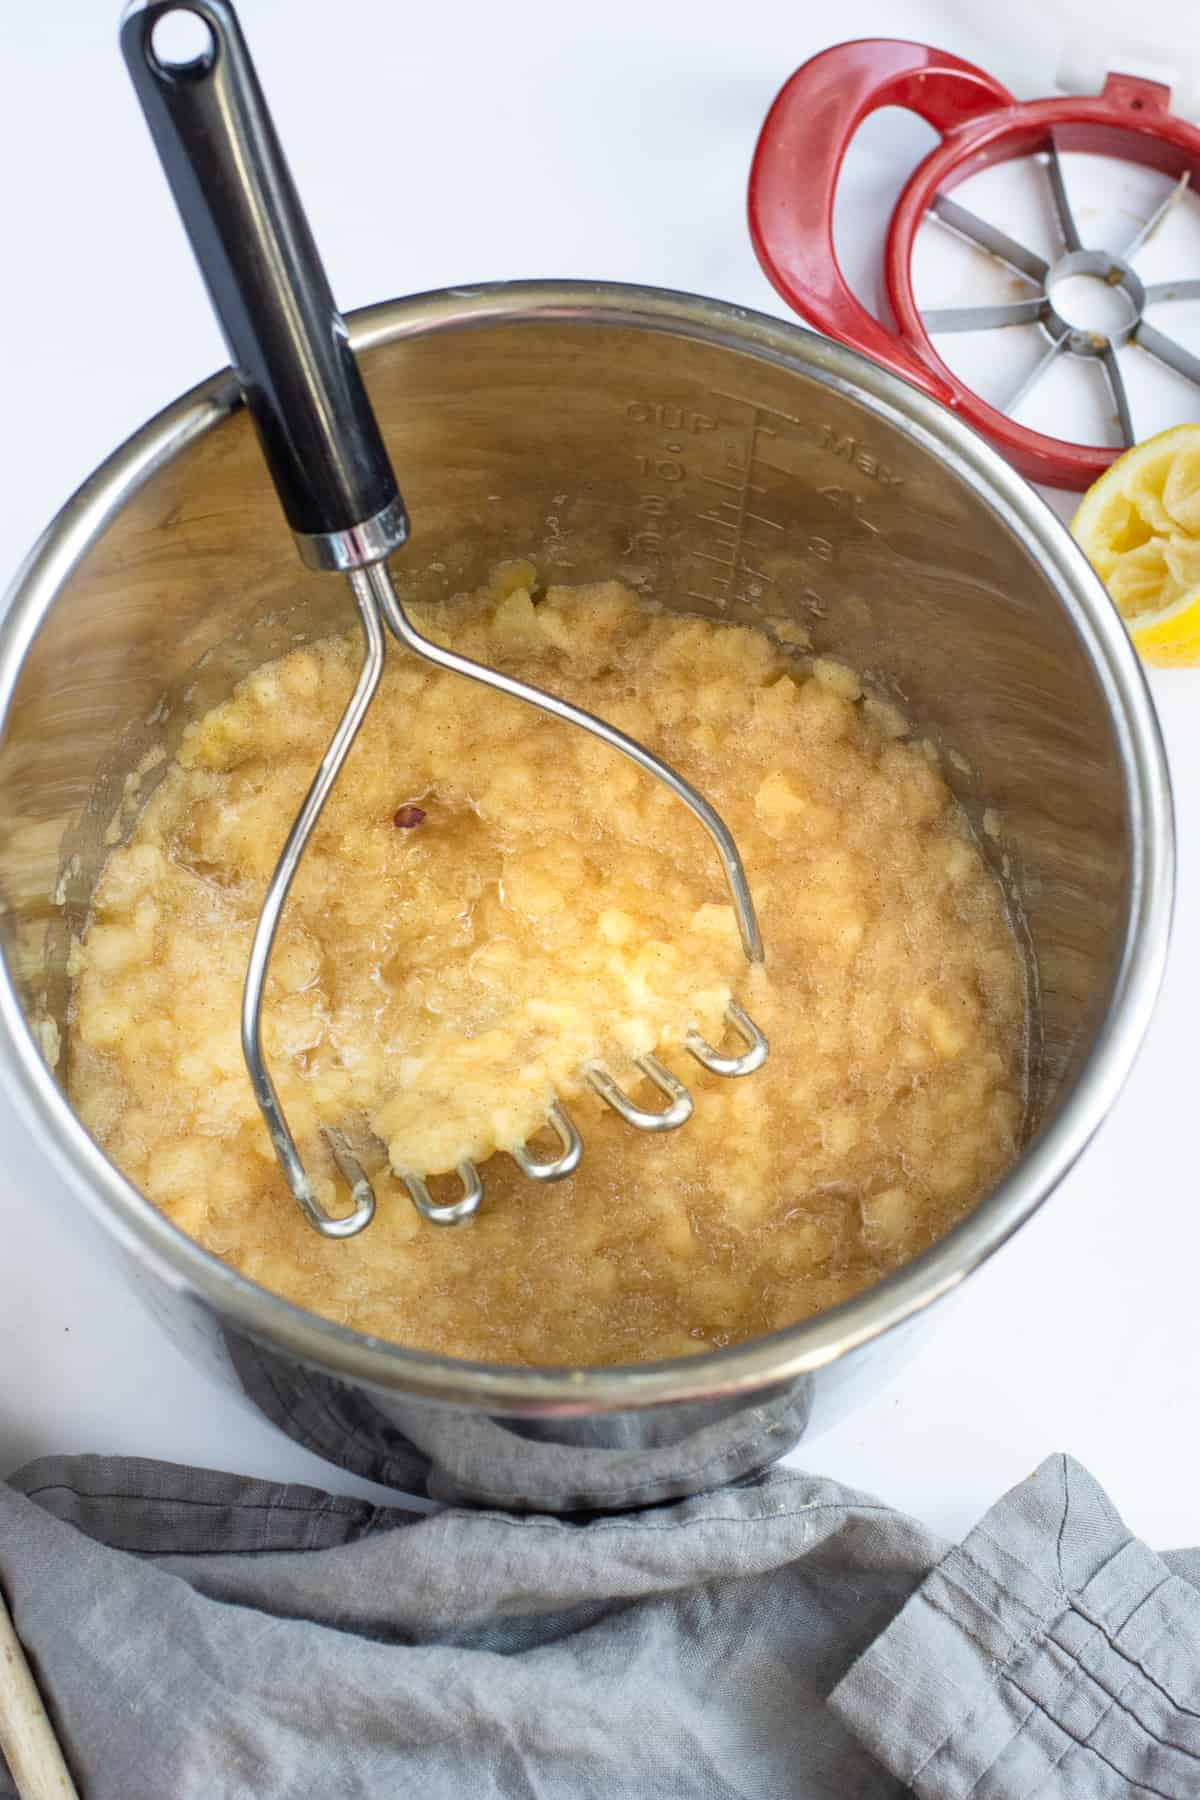 Naturally gluten free and no added sugar, this Instant Pot Applesauce is the quickest and easiest way to make applesauce. || The Butter Half #applesauce #instantpotrecipes #applesaucerecipes